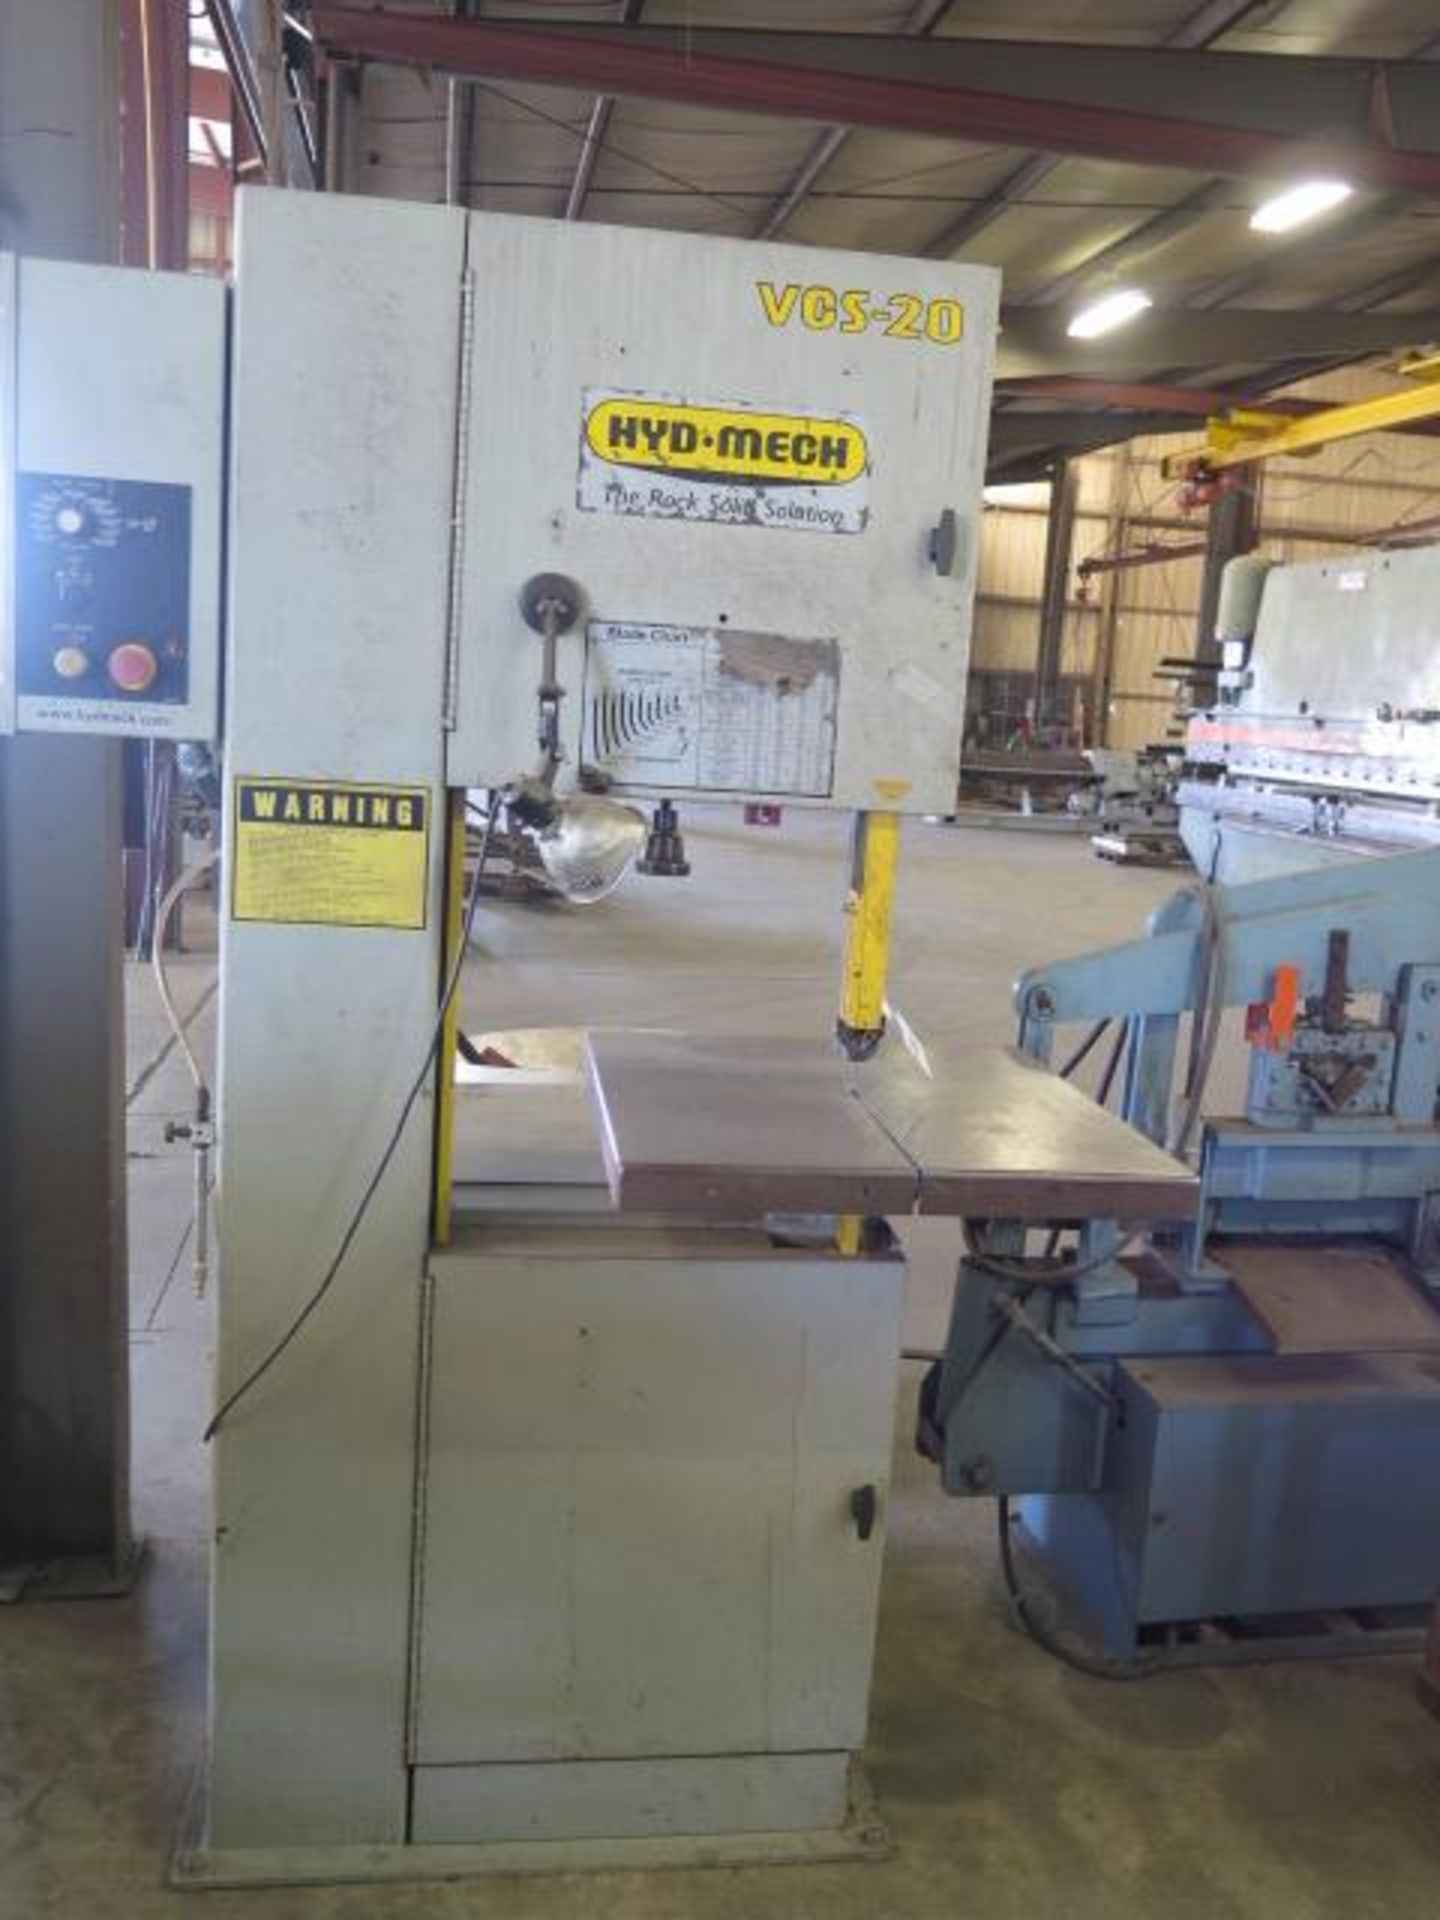 Hyd-Mech VCS-20 20” Vertical Band Saw s/n VCS2003110055 w/ 30-5500 FPM, 26” x 26” Table SOLD AS IS